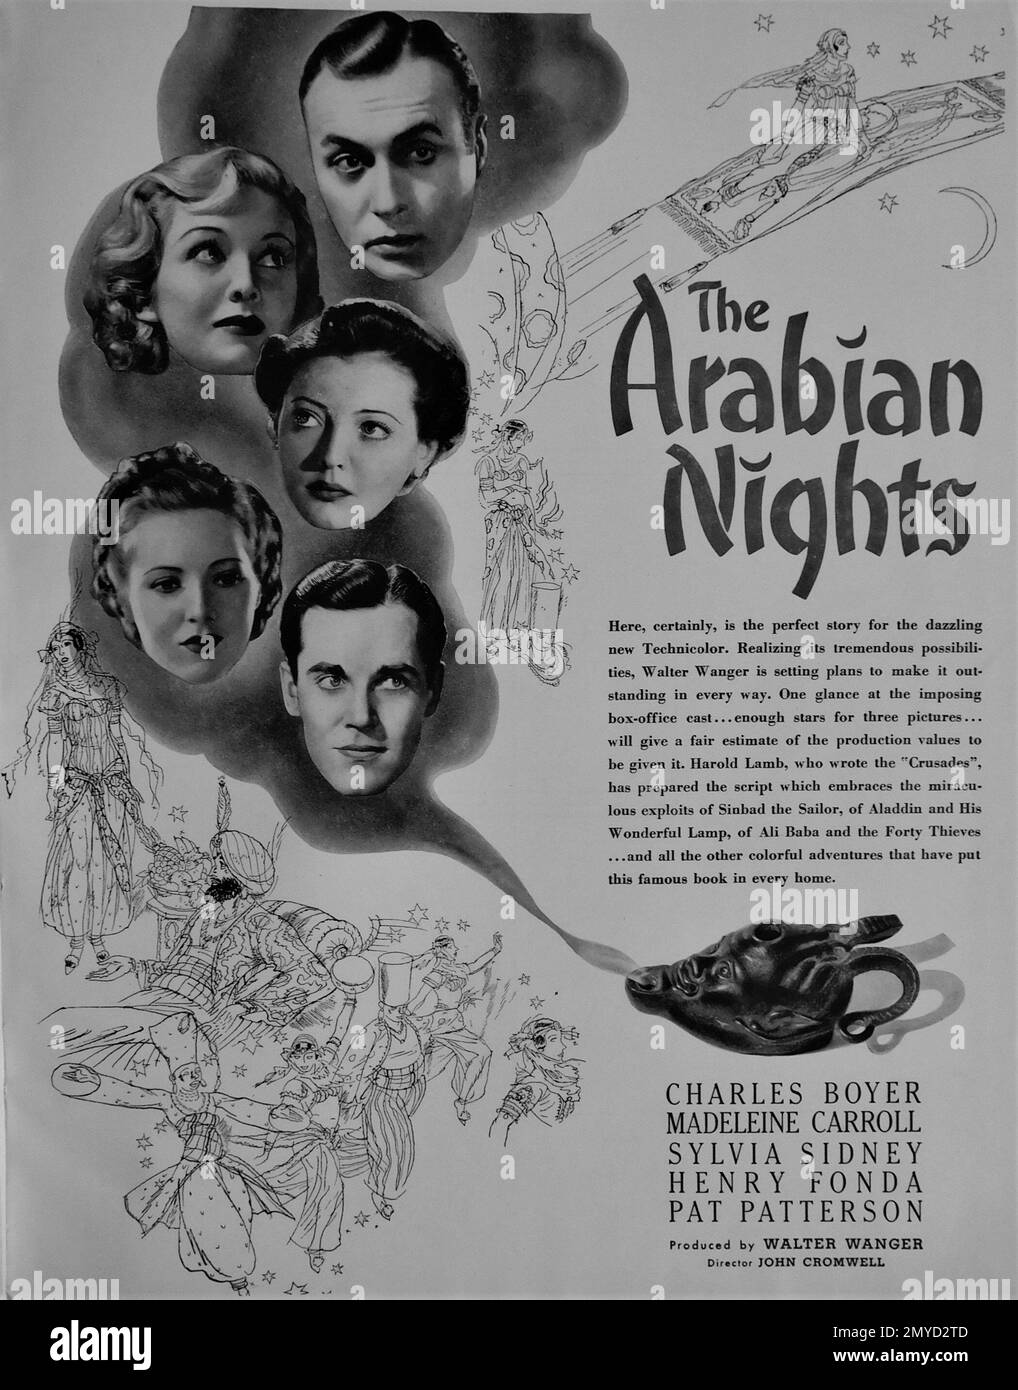 Promotional Artwork for unrealised project CHARLES BOYER MADELEINE CARROLL SYLVIA SIDNEY HENRY FONDA and PAT PATTERSON in THE ARABIAN NIGHTS director JOHN CROMWELL producer WALTER WANGER from the United Artists Campaign Year Book for Exhibitors for 1937 - 1938 Stock Photo